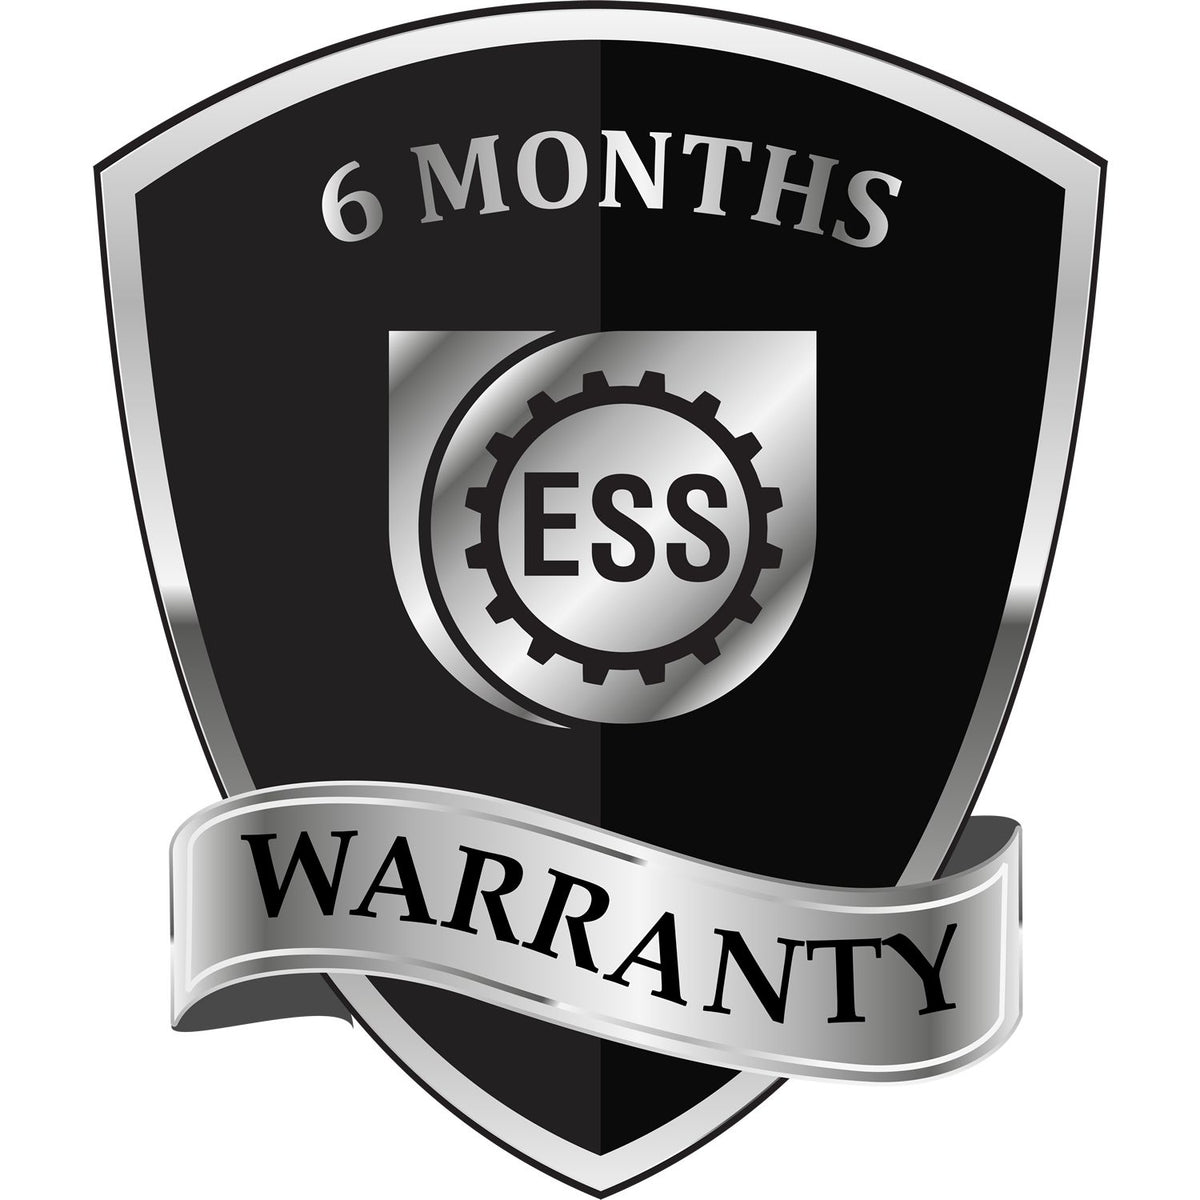 A badge or emblem showing a warranty icon for the Colorado Professional Engineer Seal Stamp